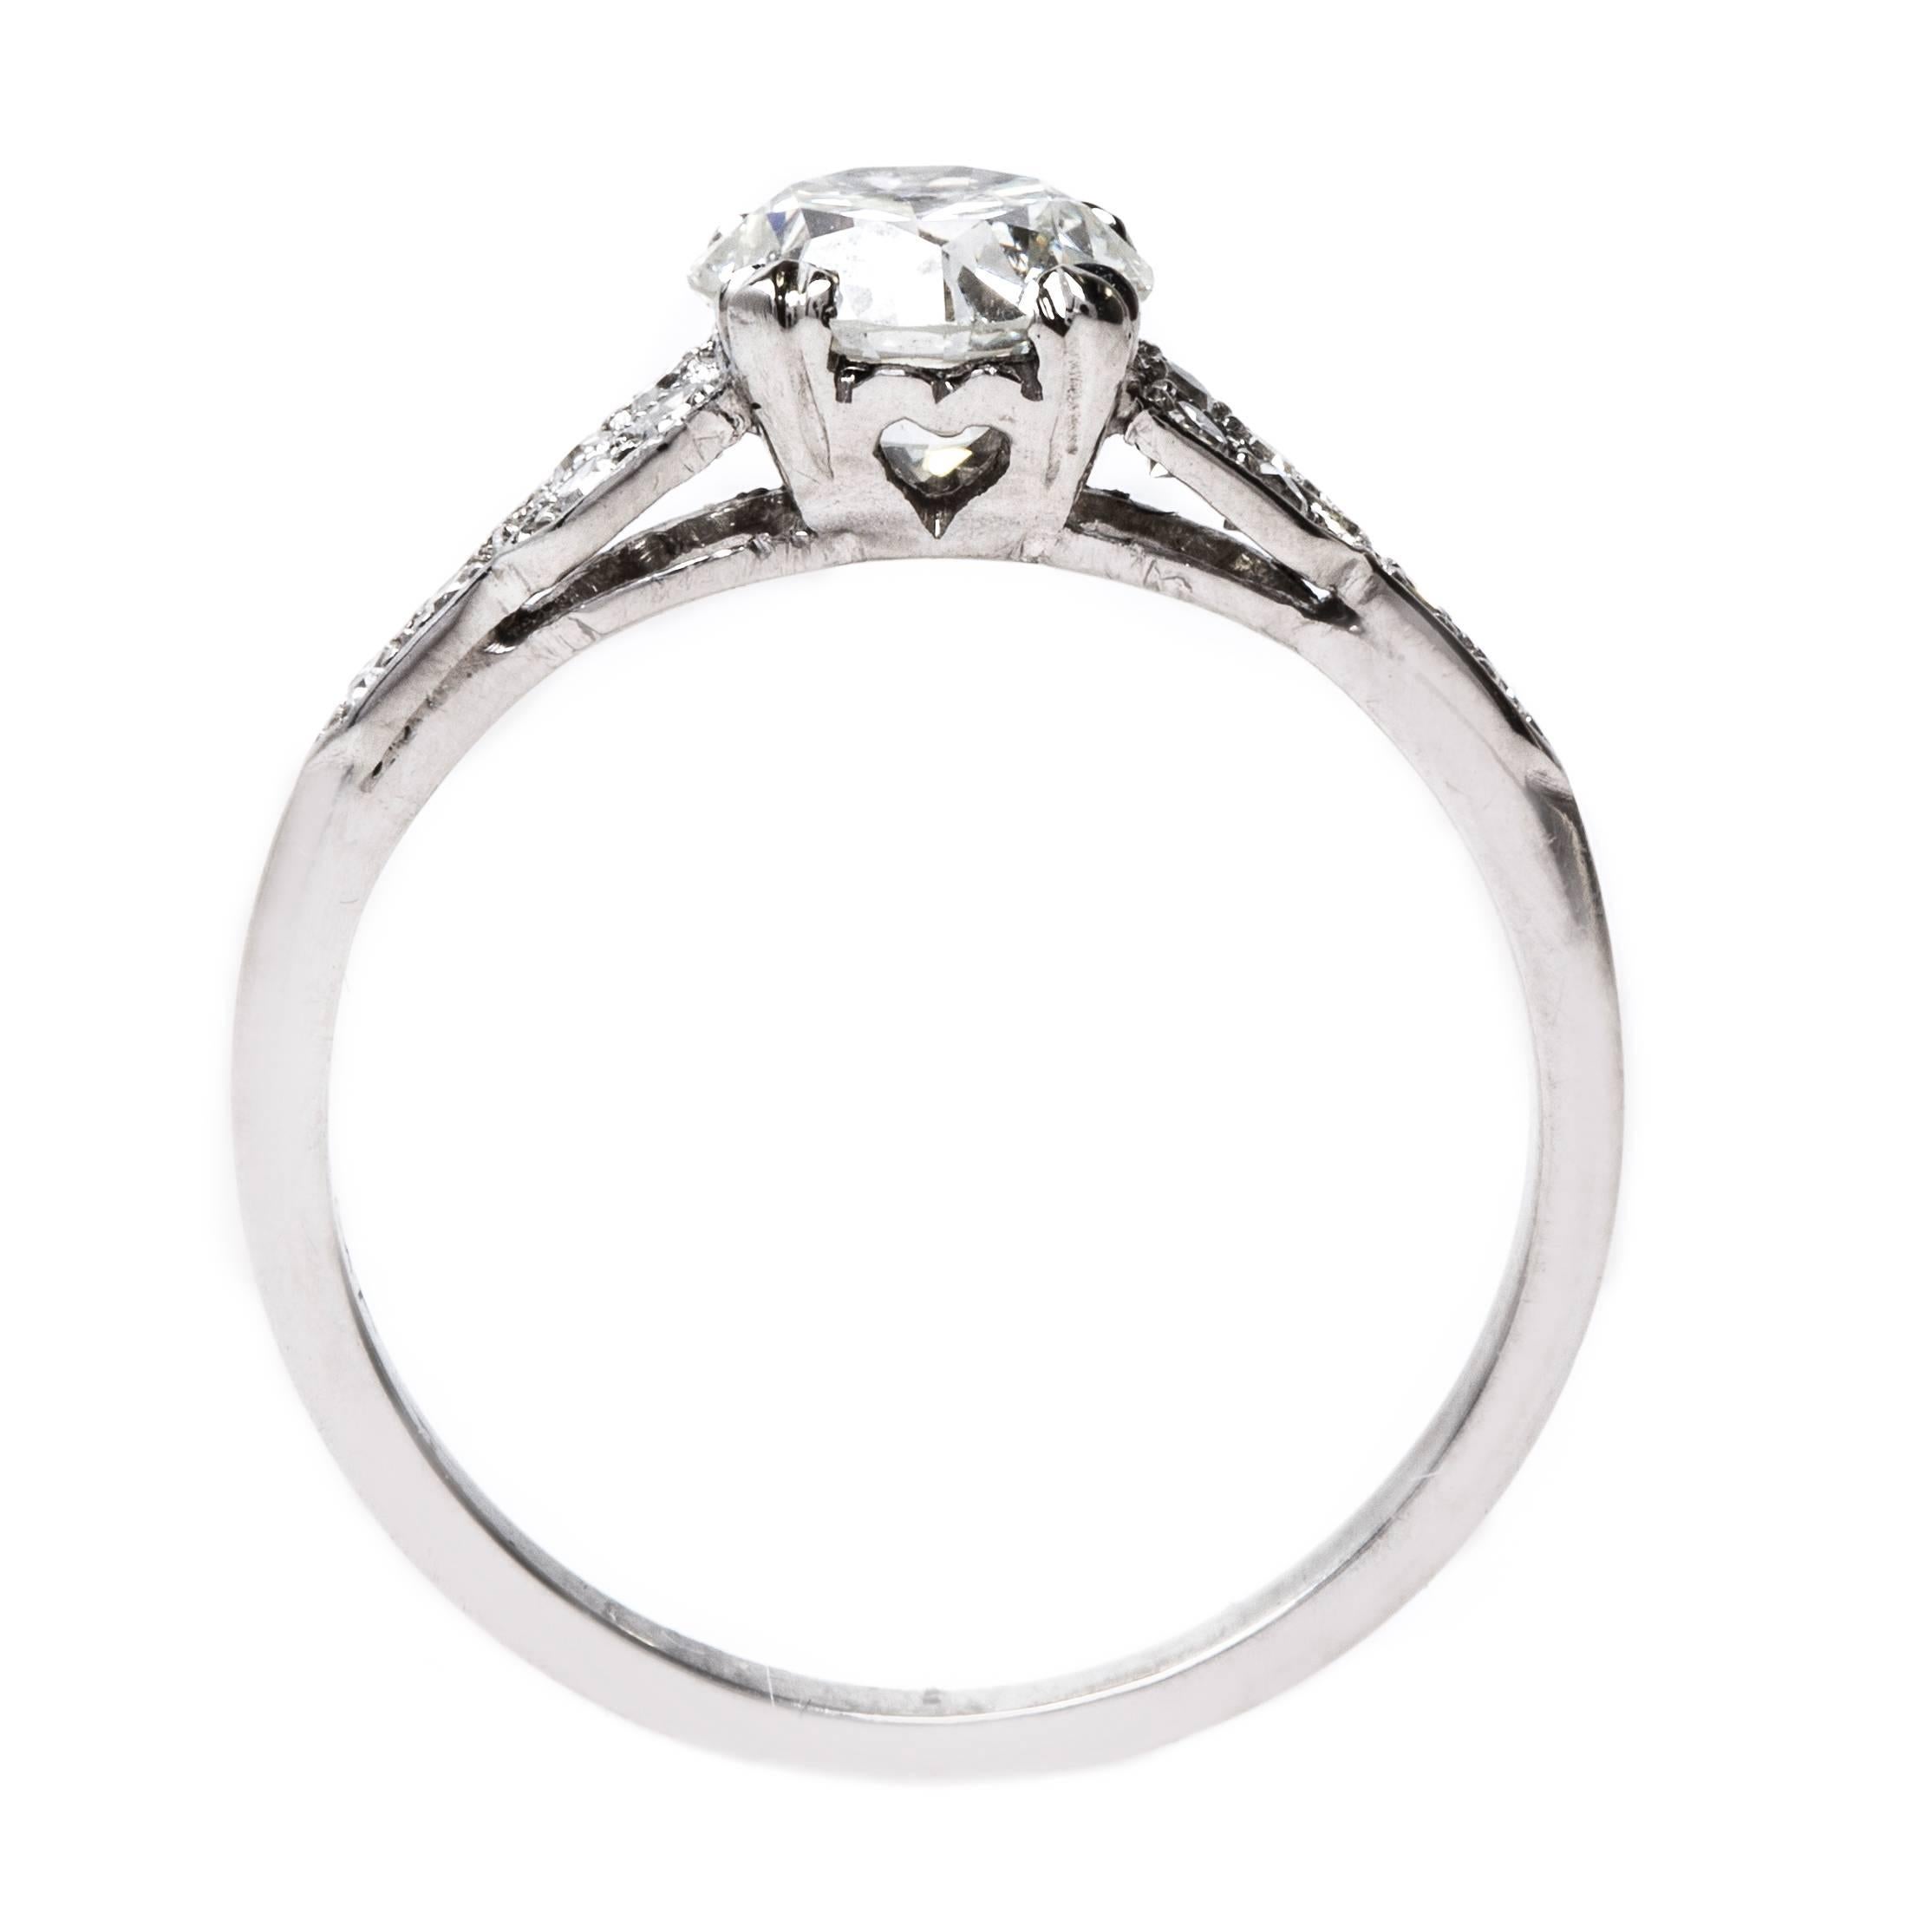 Sparkling Art Deco Engagement Ring with EGL Certified Old European Cut Diamond 1